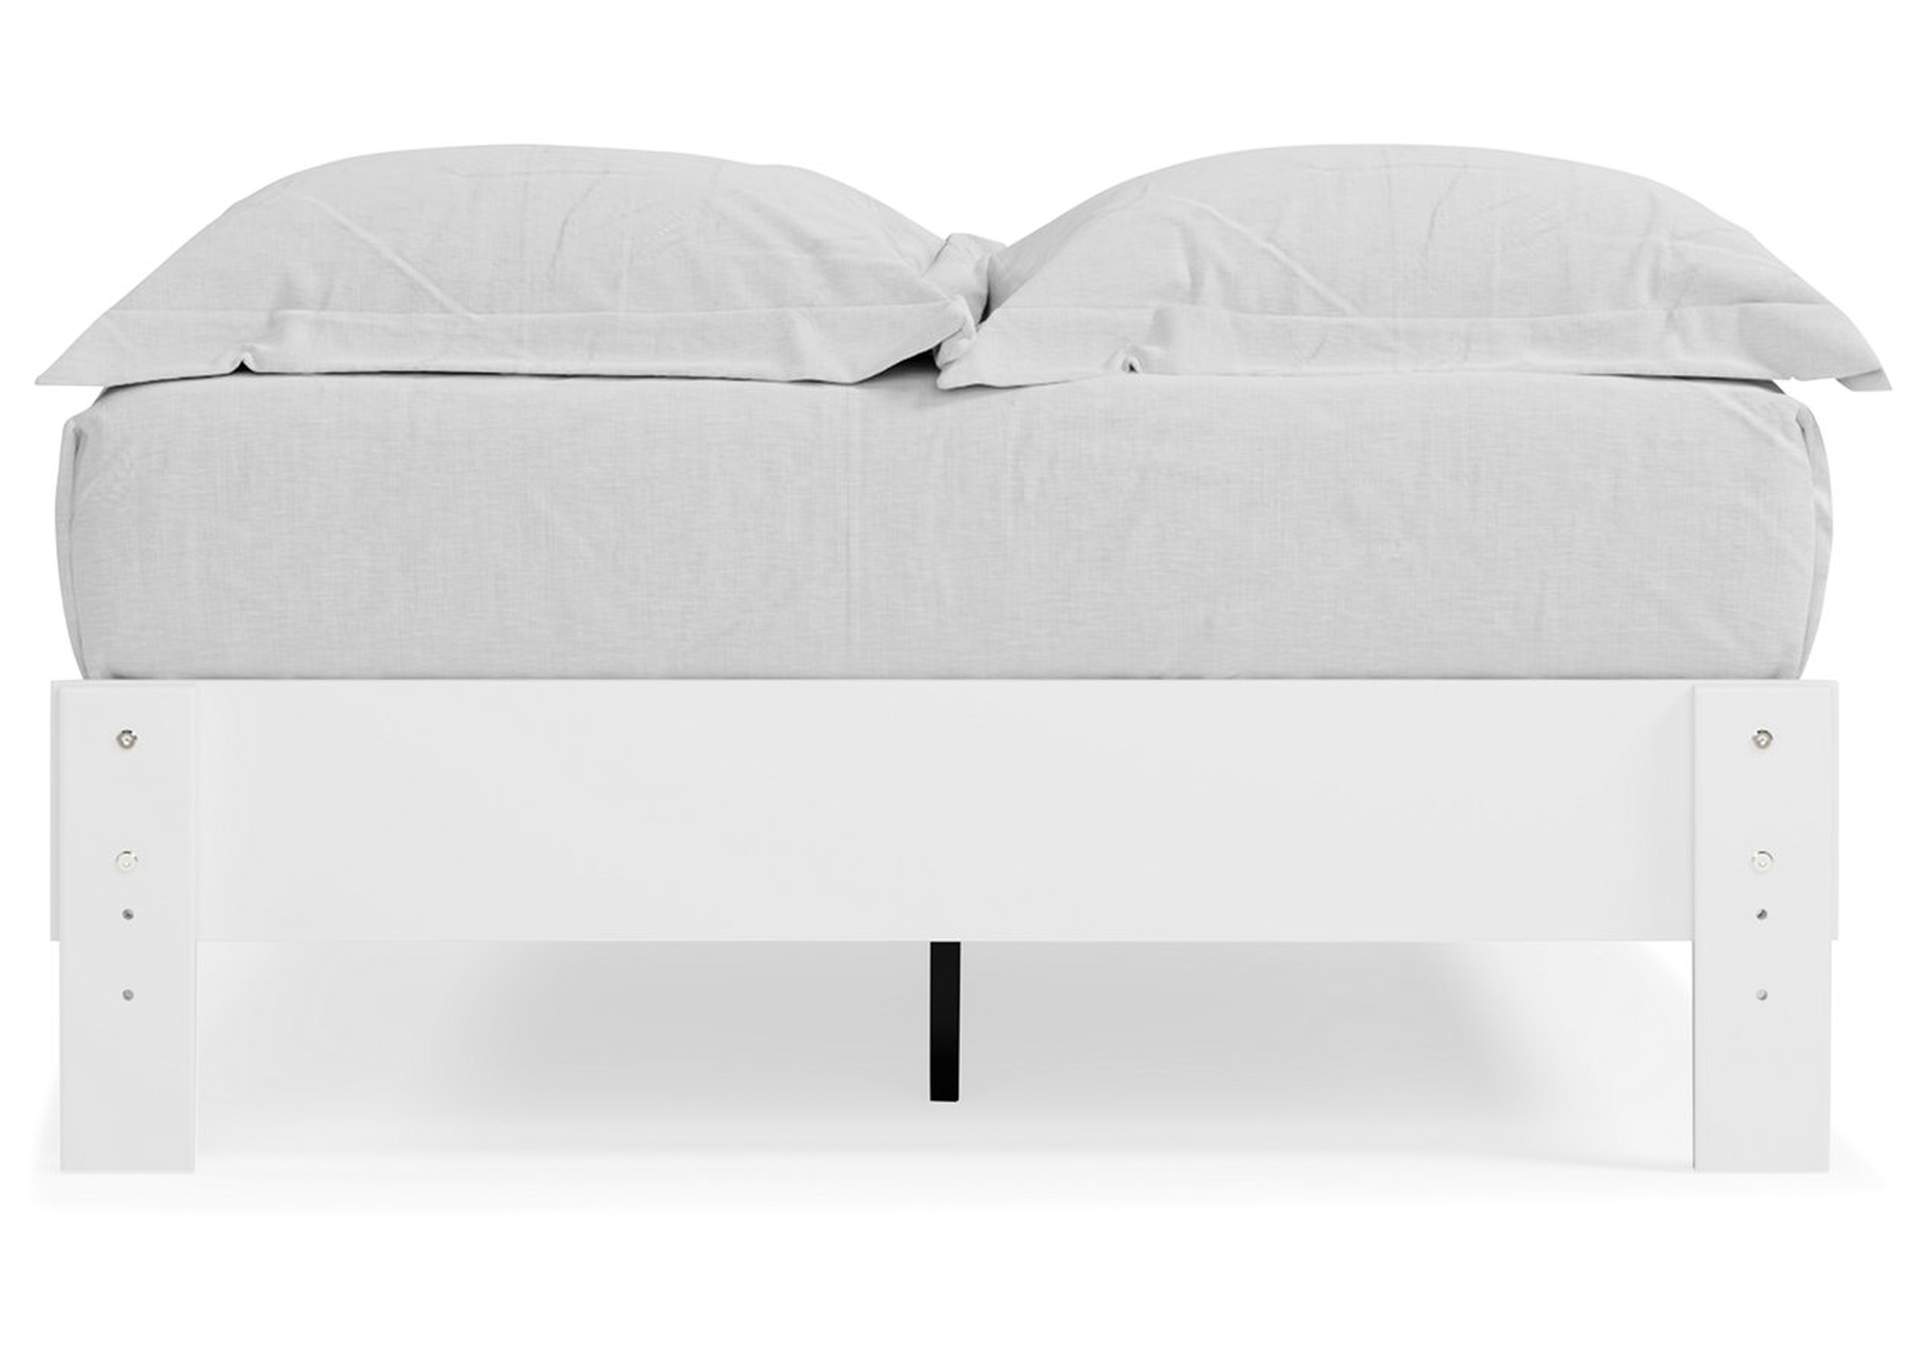 Piperton Full Platform Bed,Direct To Consumer Express